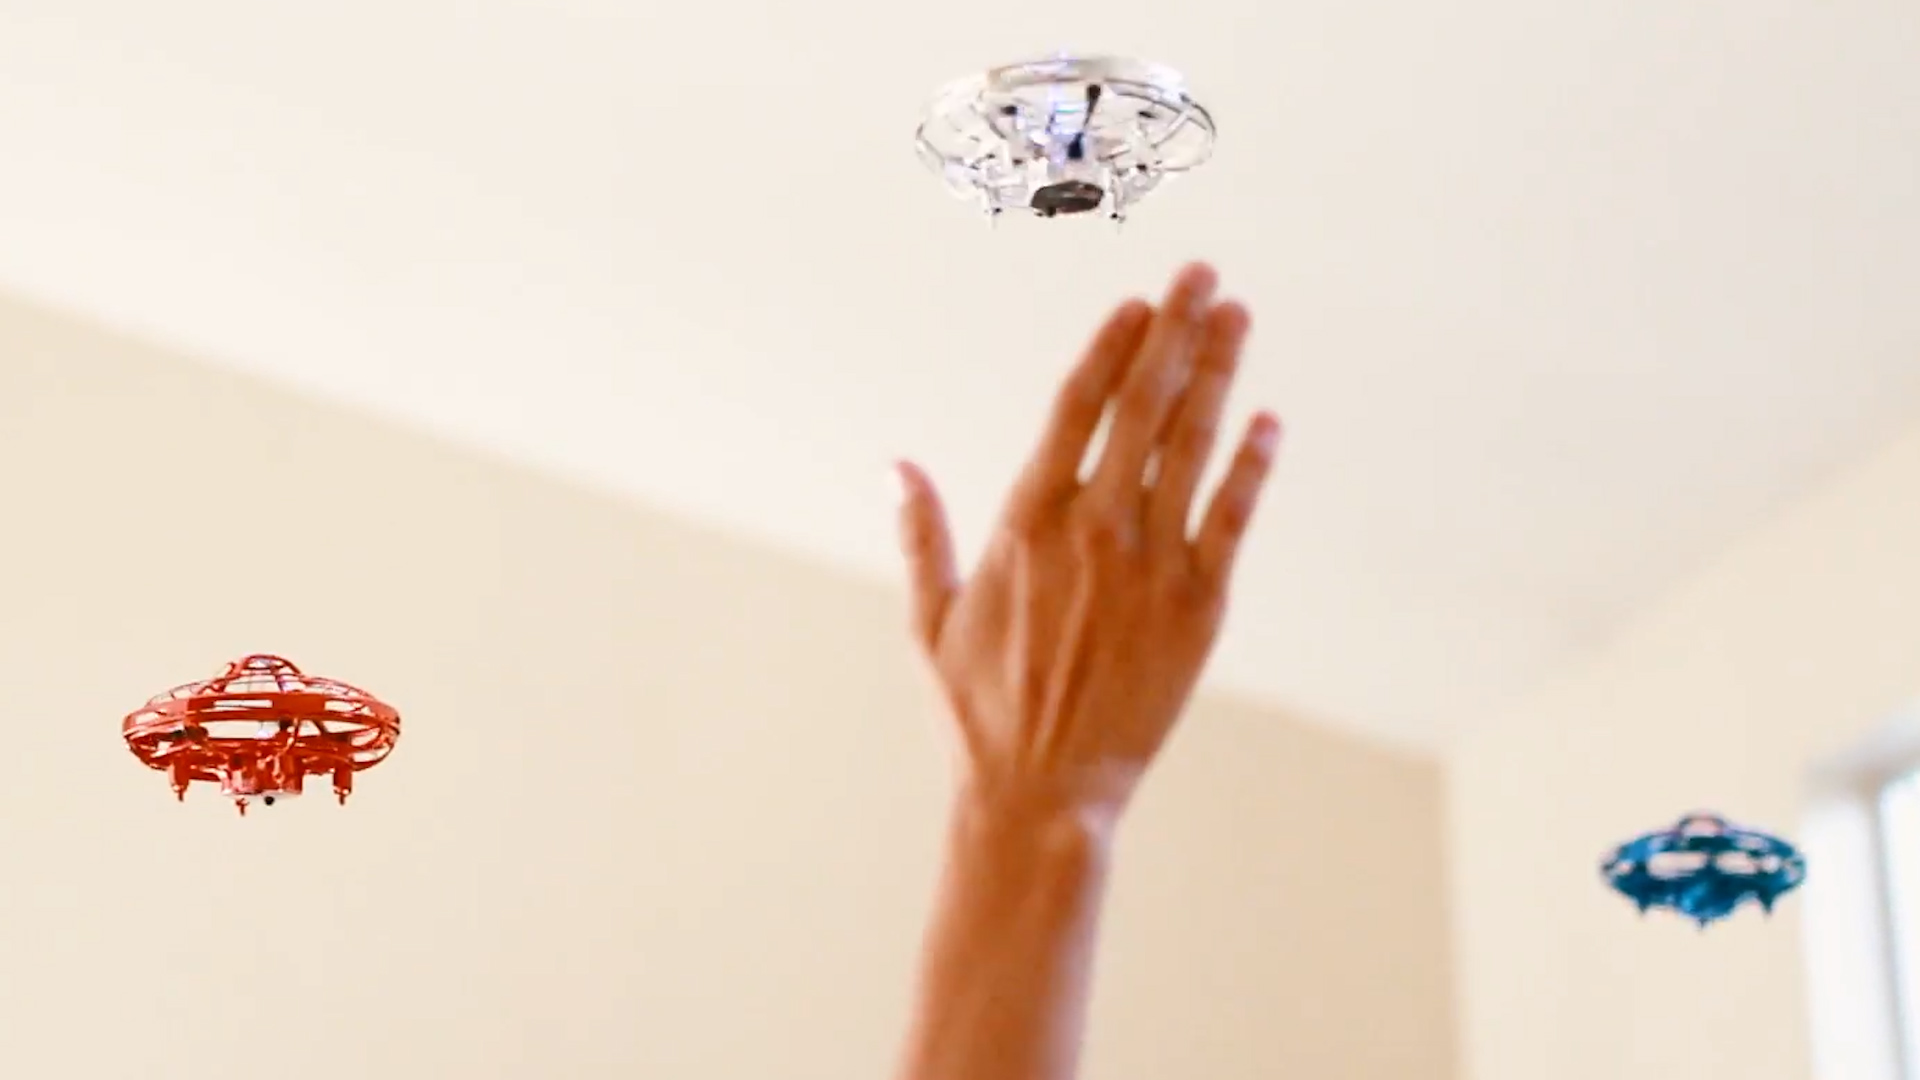 Control this incredible UFO drone toy with nothing but your hands